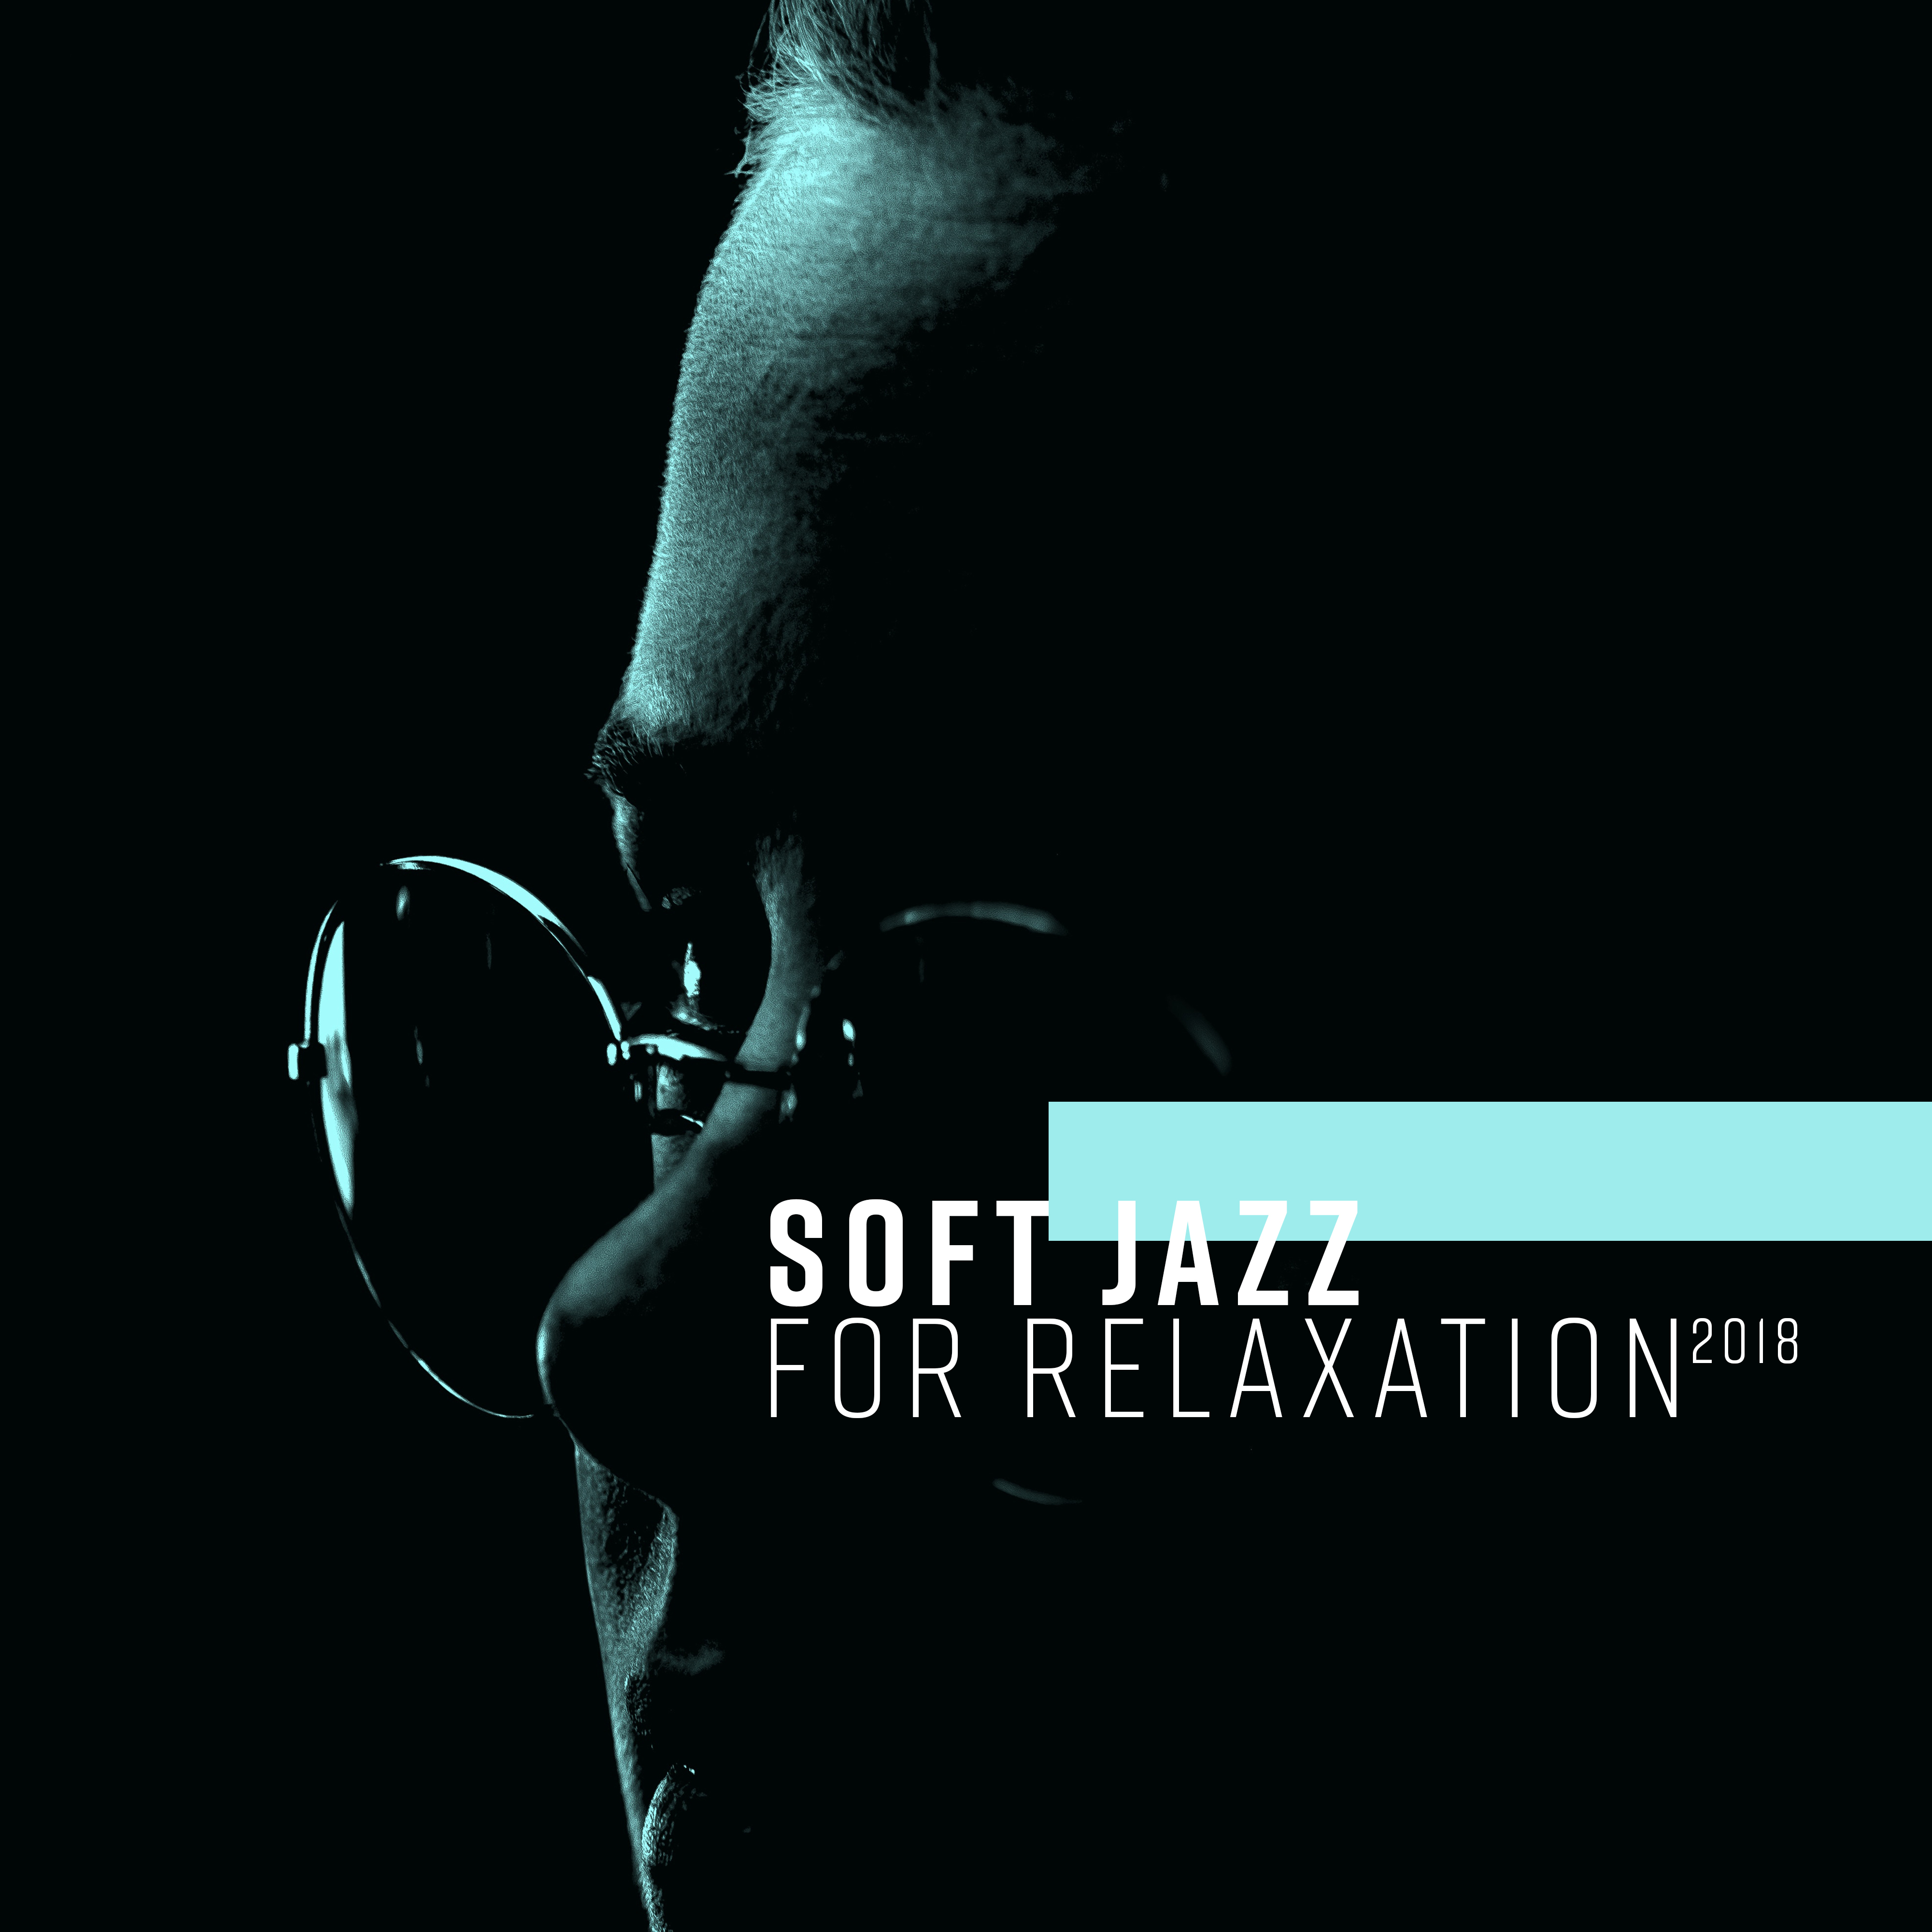 Soft Jazz for Relaxation 2018